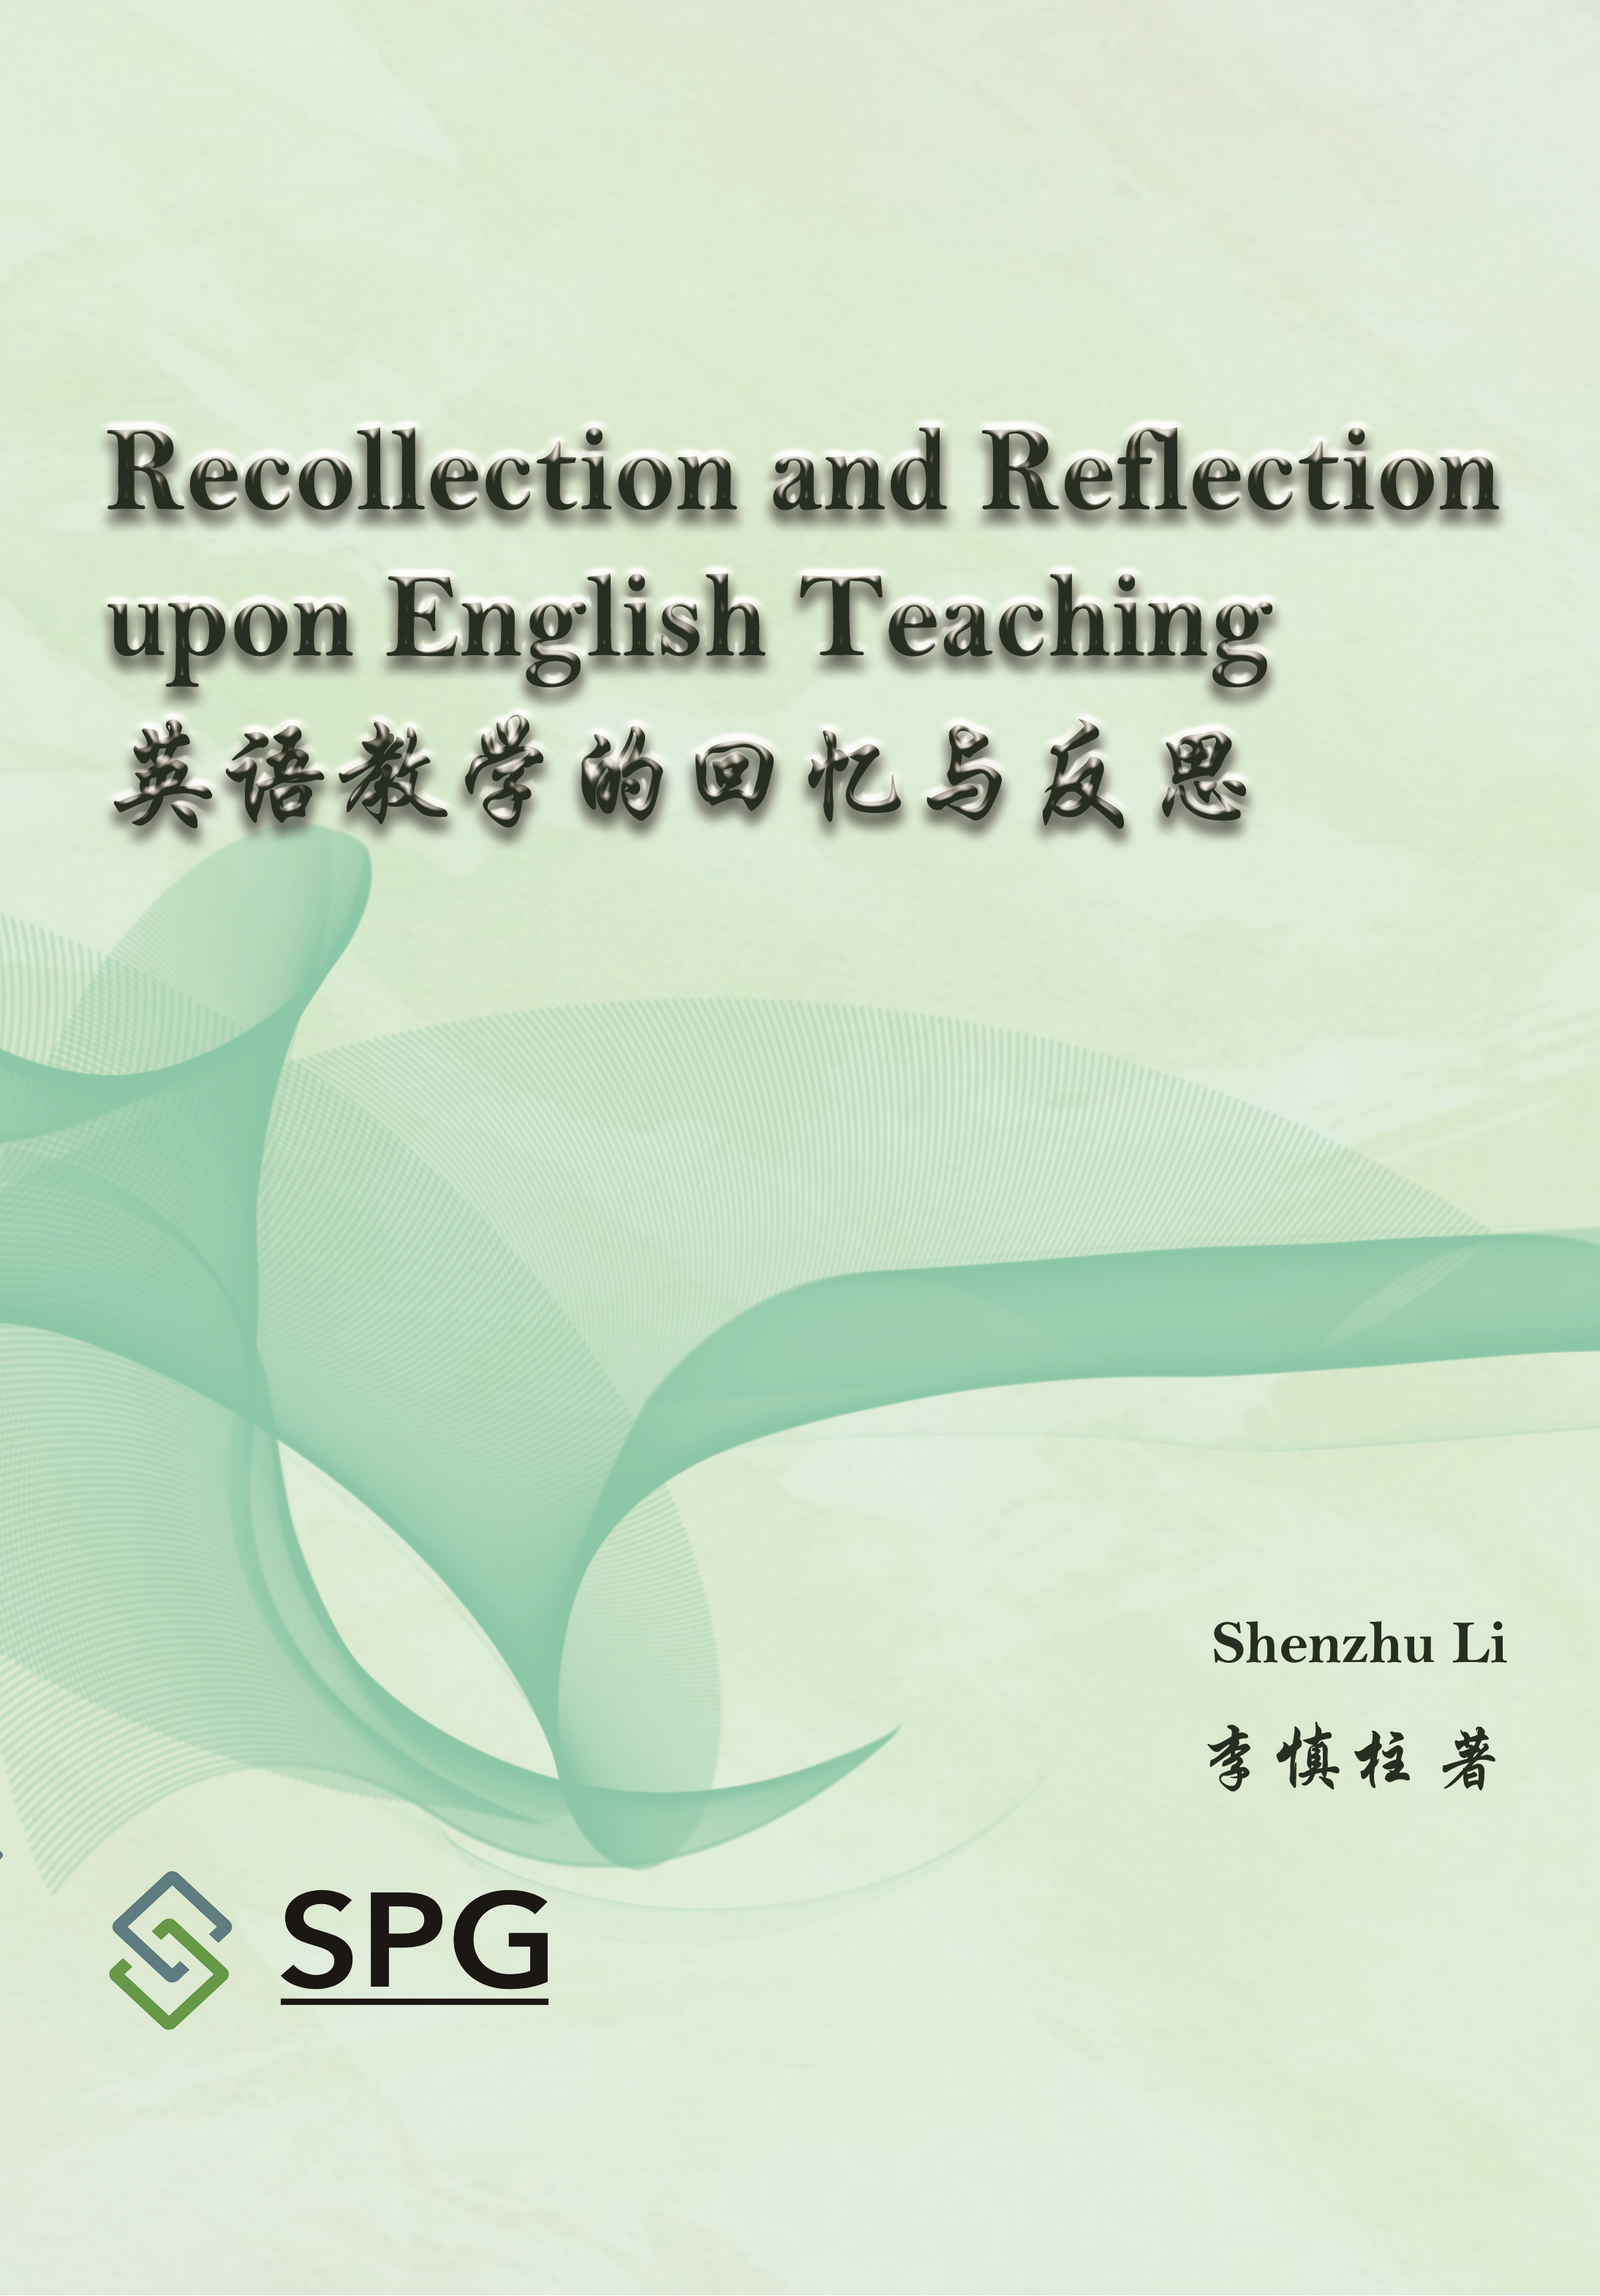 Recollection and Reflection upon English Teaching | Scholar Publishing Group